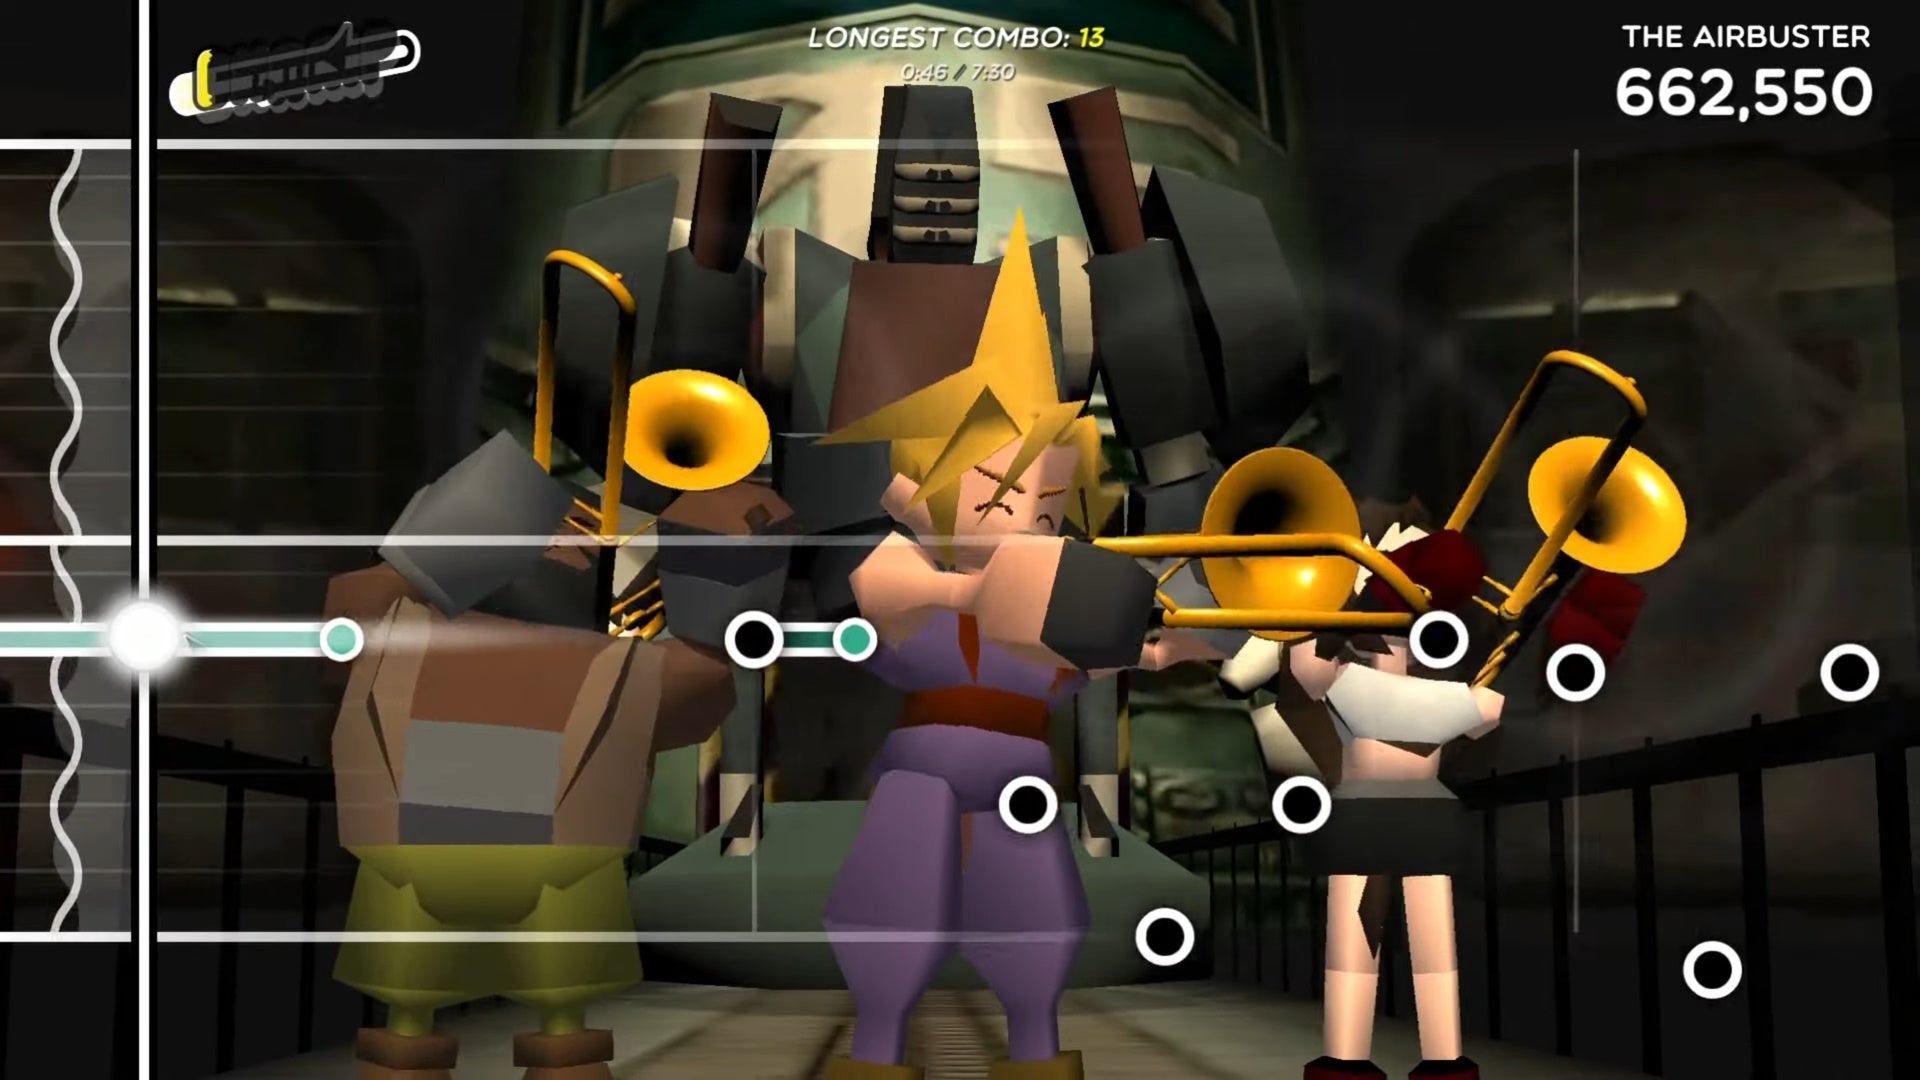 This Final Fantasy 7 Trombone Champ mod is pitch perfect